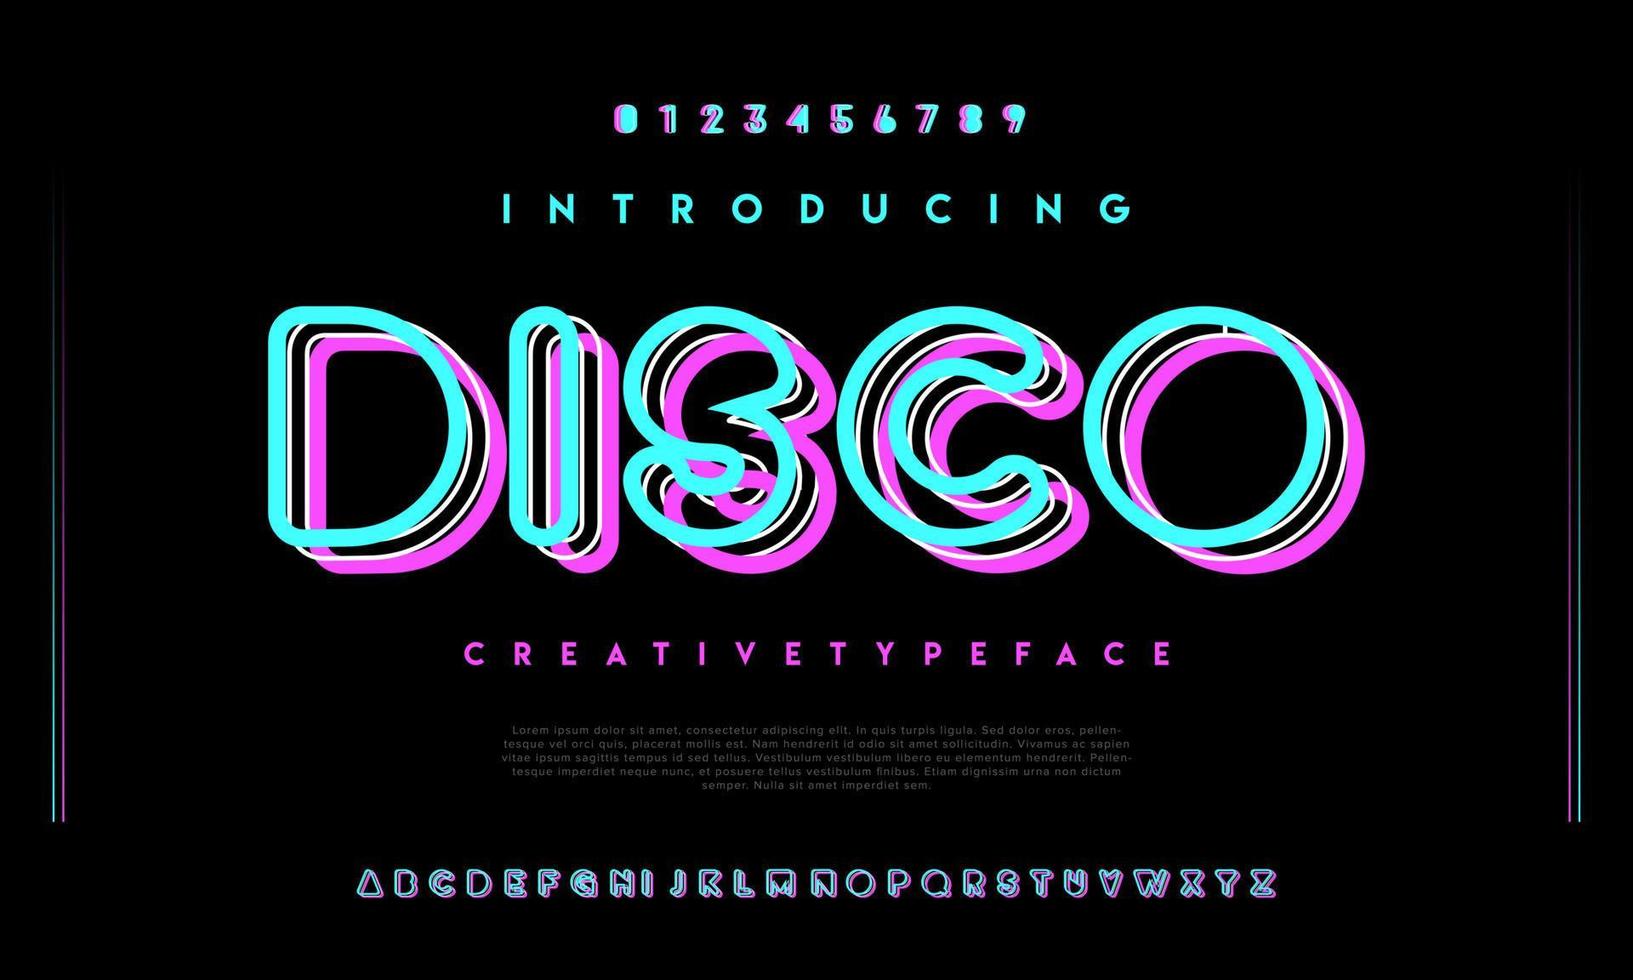 Disco urban led neon light font typography. Abstract alphabet font vector